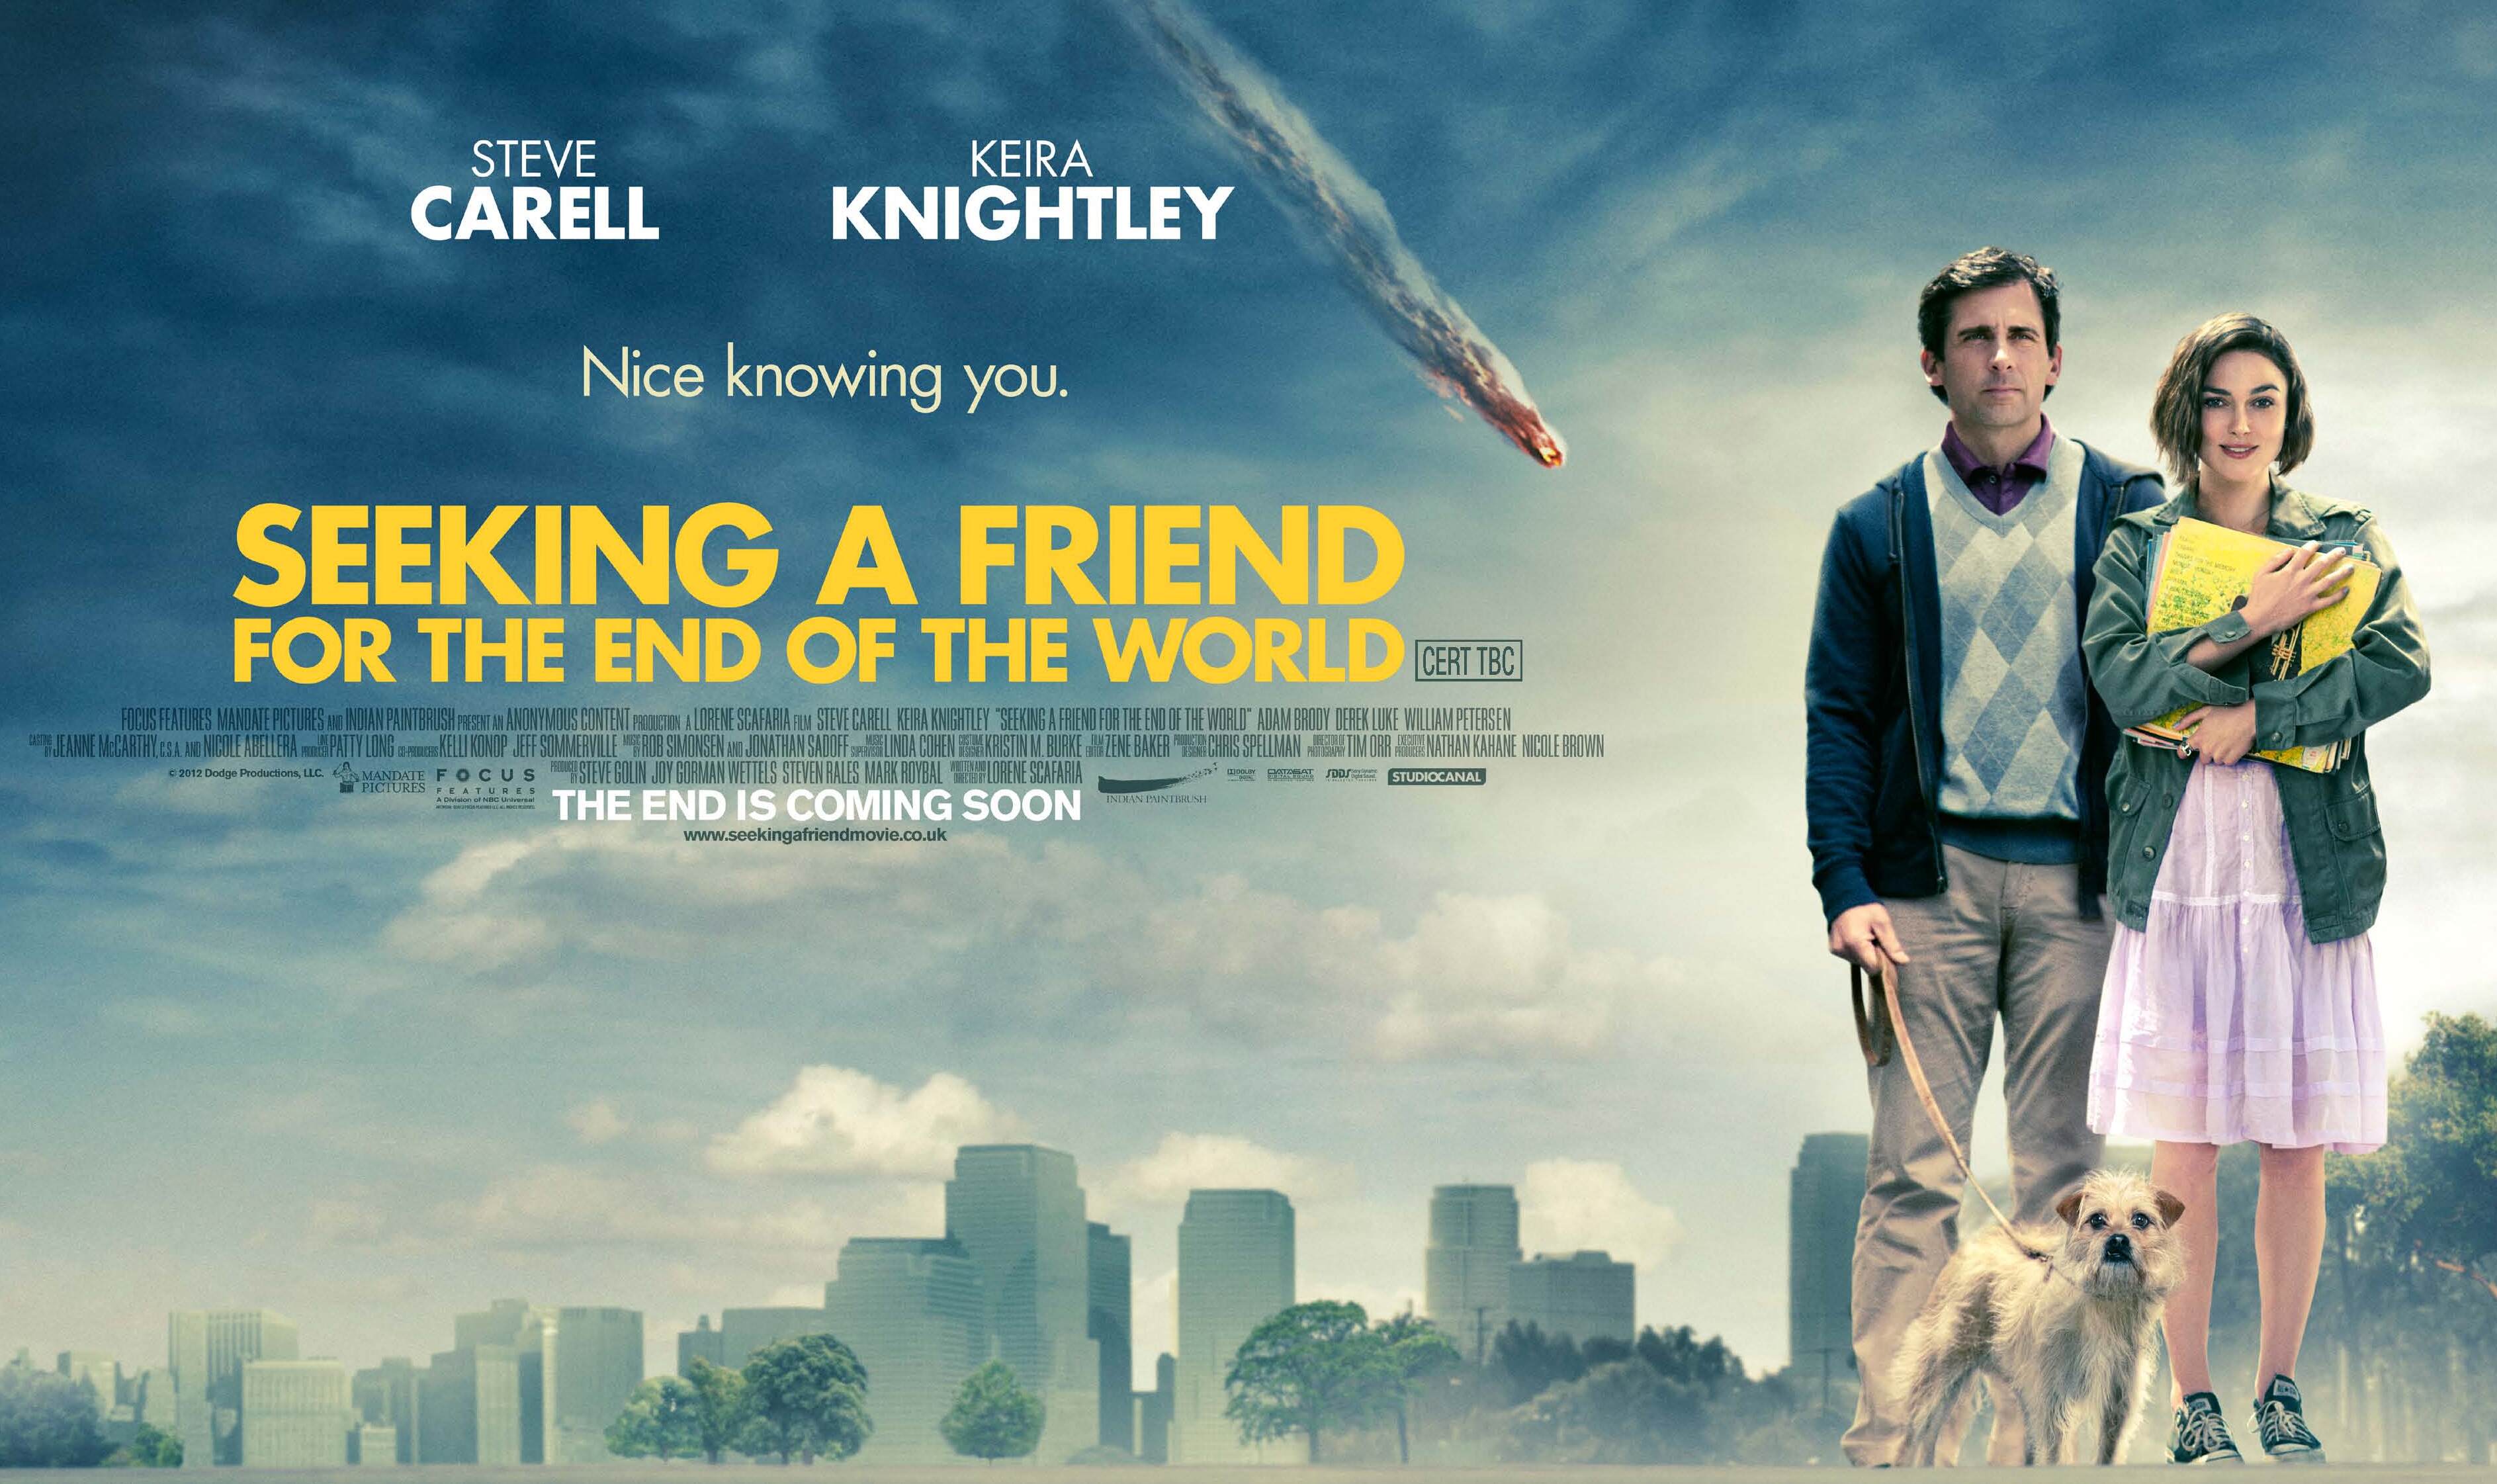 32-facts-about-the-movie-seeking-a-friend-for-the-end-of-the-world